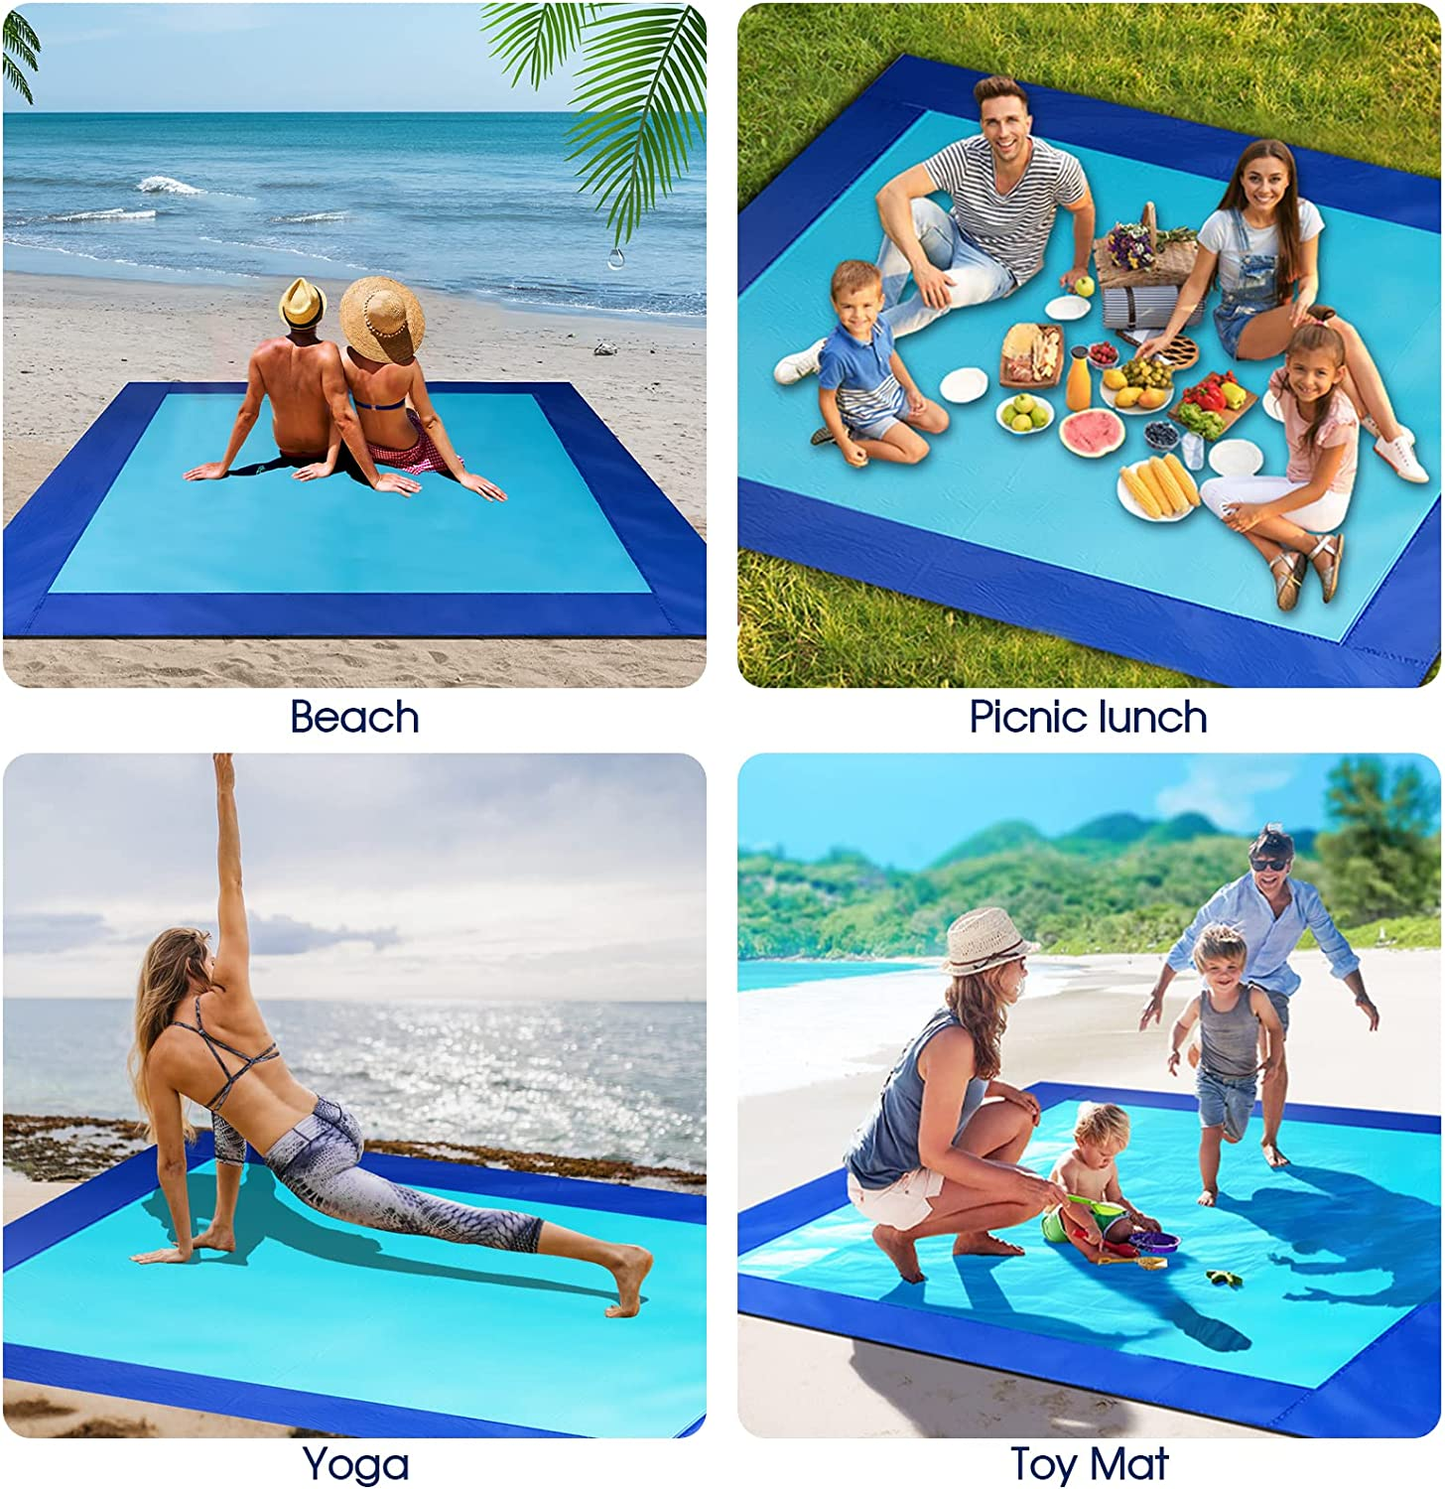 Beach Blanket Waterproof Sandproof Beach Mat Large 83" X 79" for 4-7 Adults Sand Free Mat Quick Drying Lightweight Beach Accessories with 4 Stakes and 4 Corner Pockets for Picnic, Travel